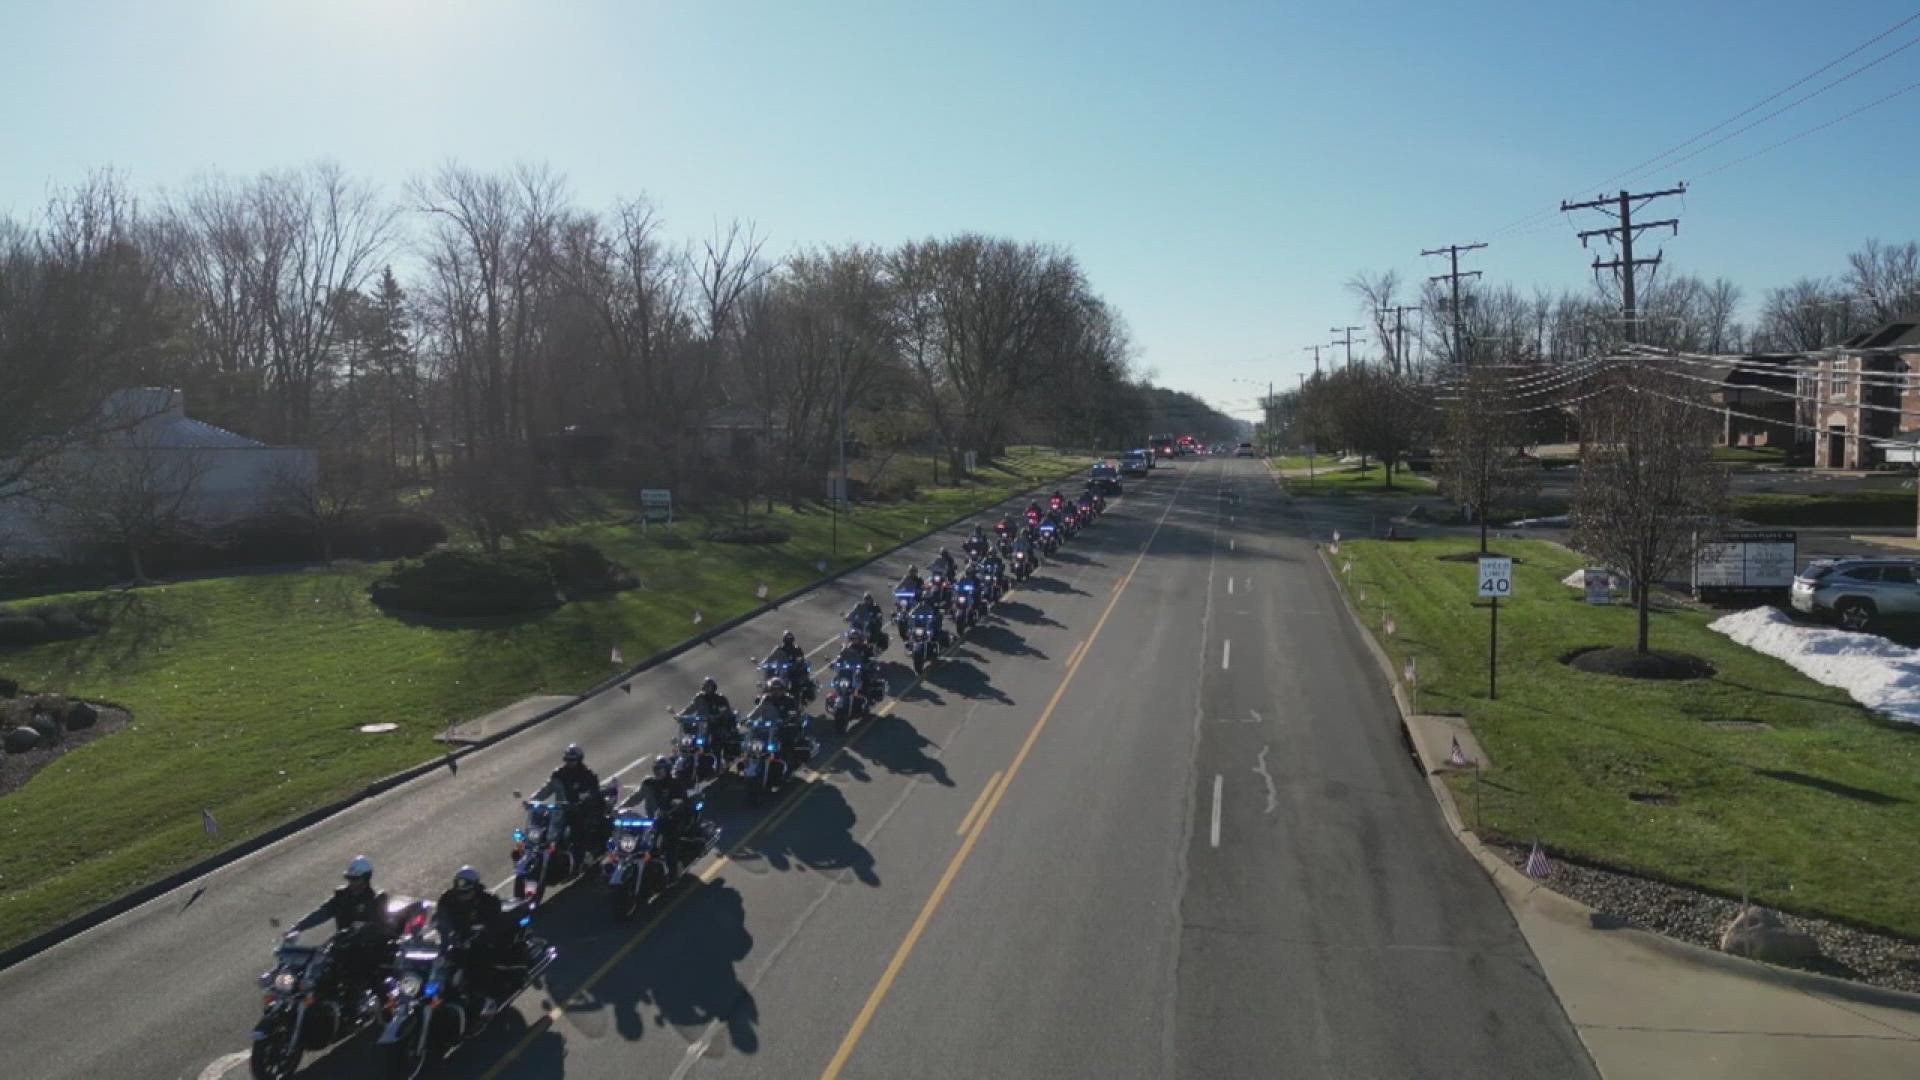 A procession was held ahead of the funeral for fallen Cleveland firefighter Johnny Tetrick.